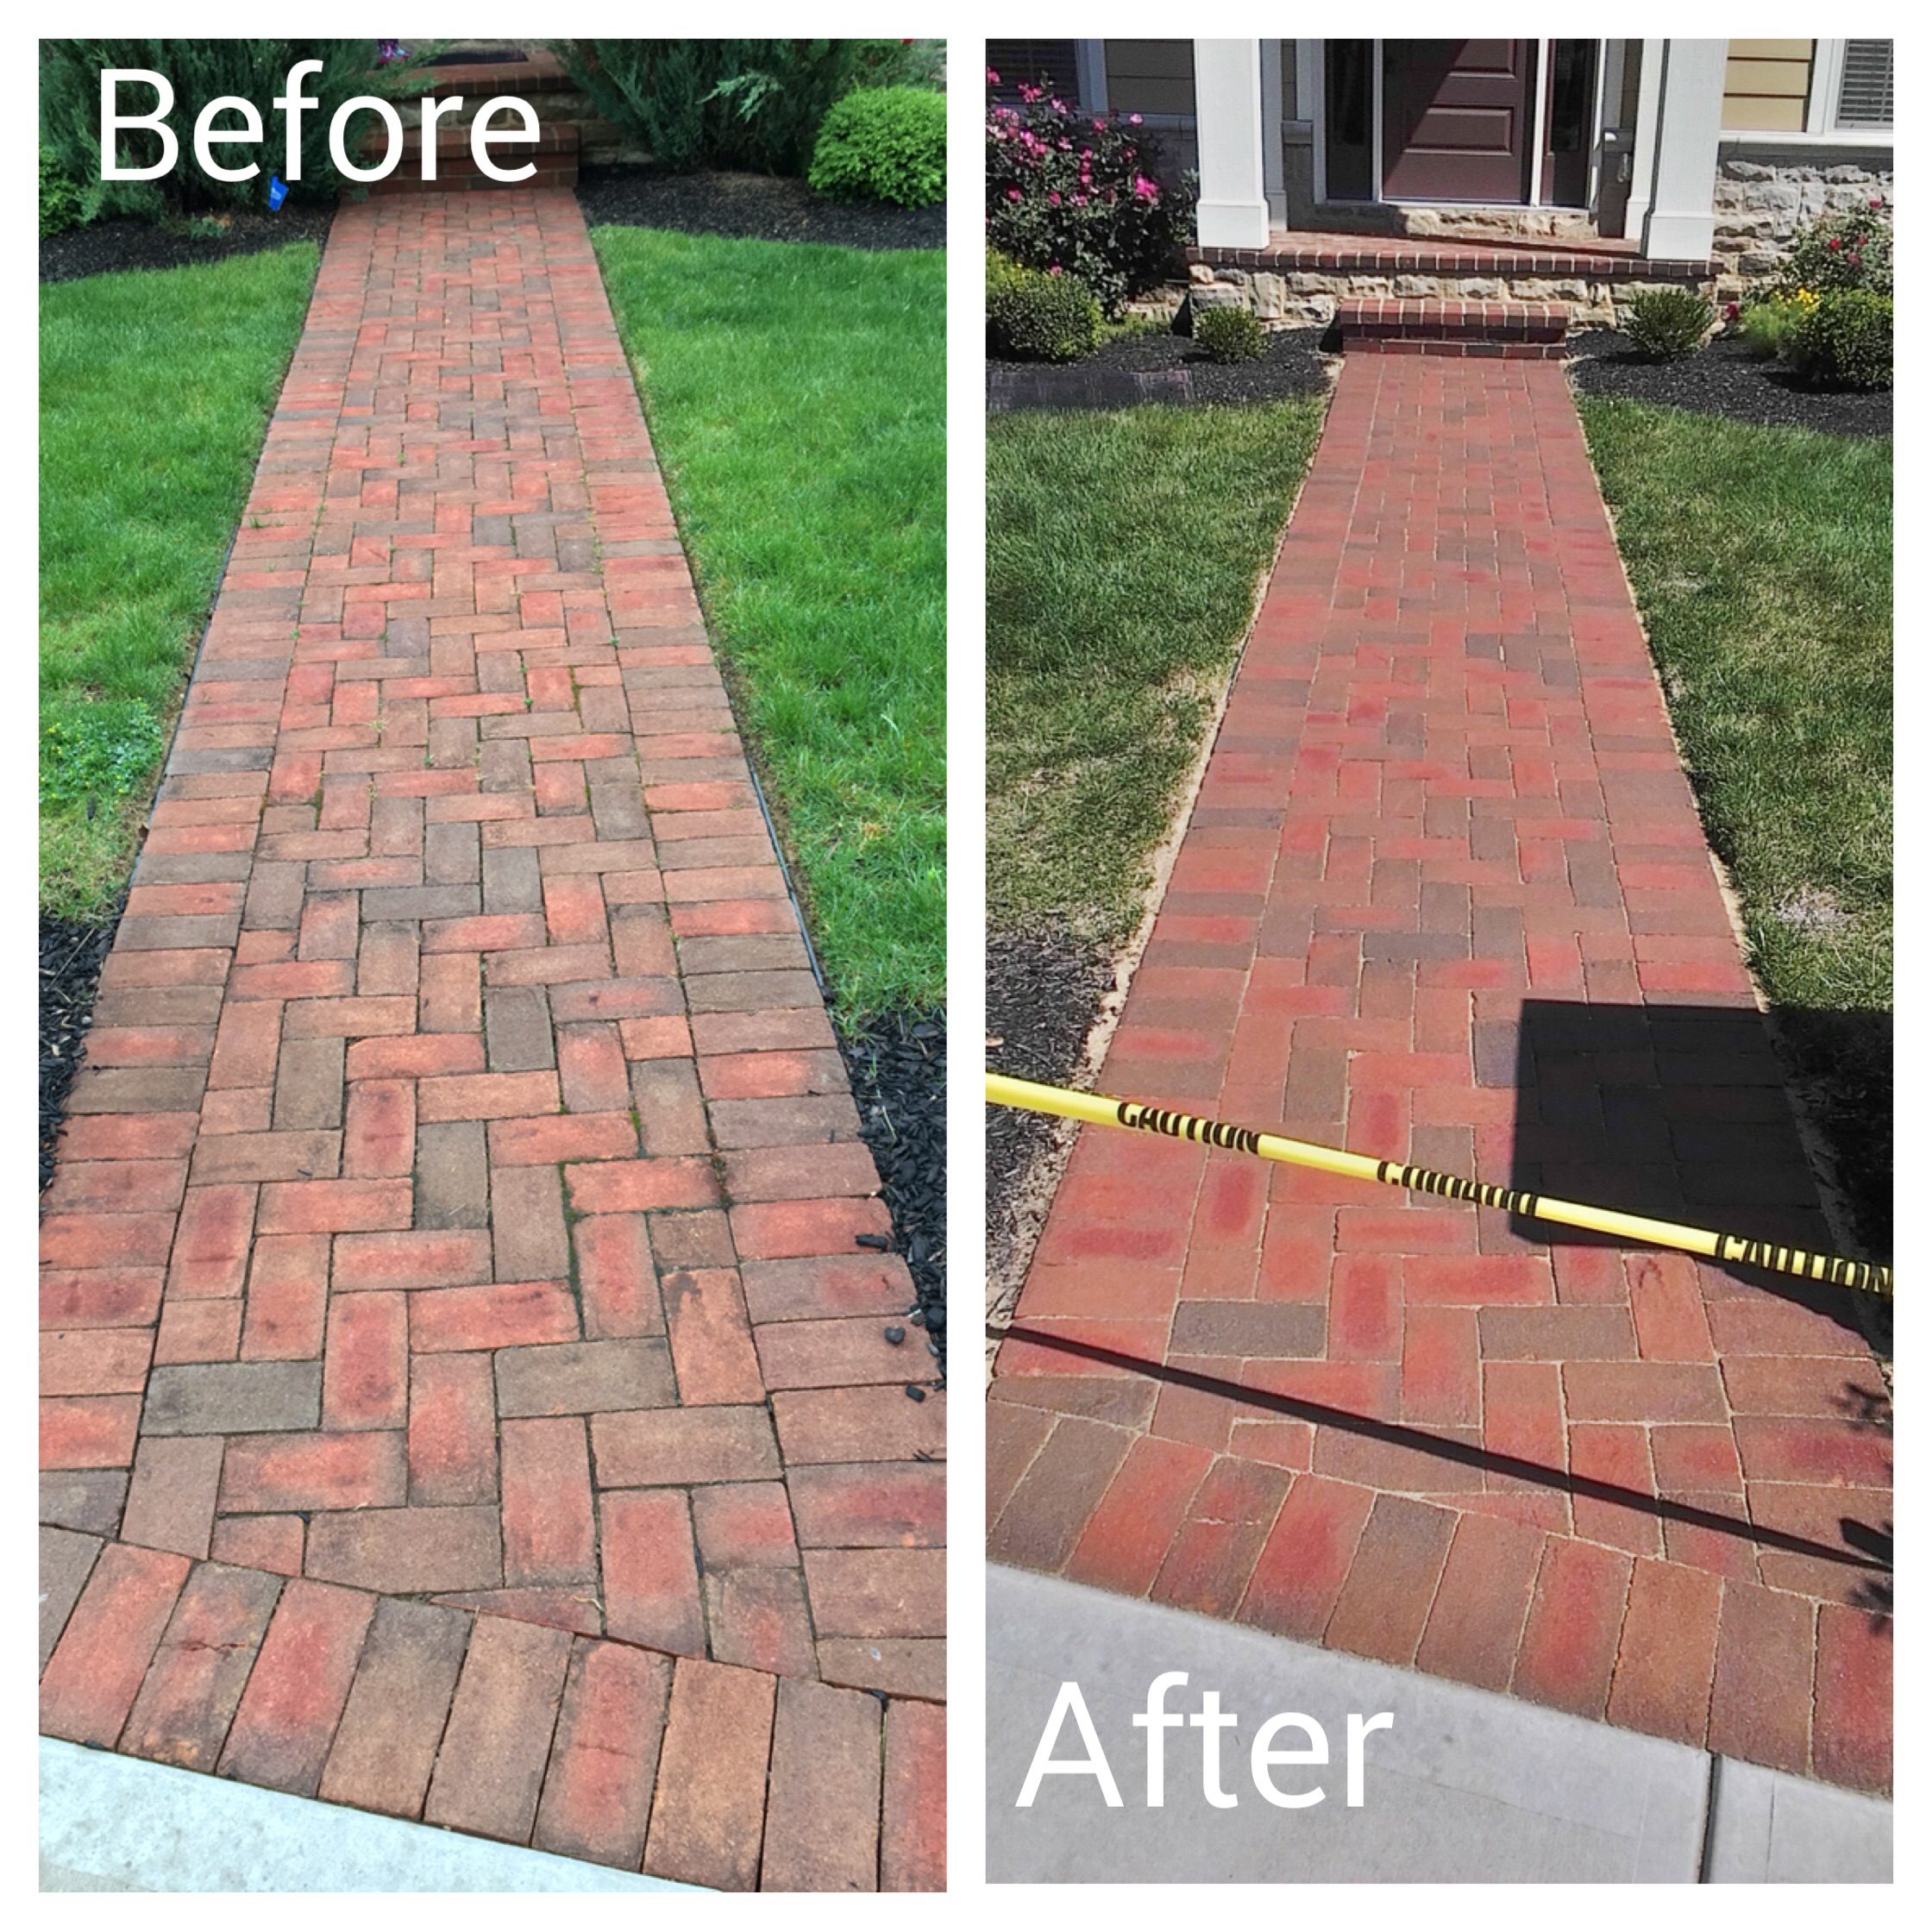 Paver Cleaning and Paver Sealing Boca Raton, FL